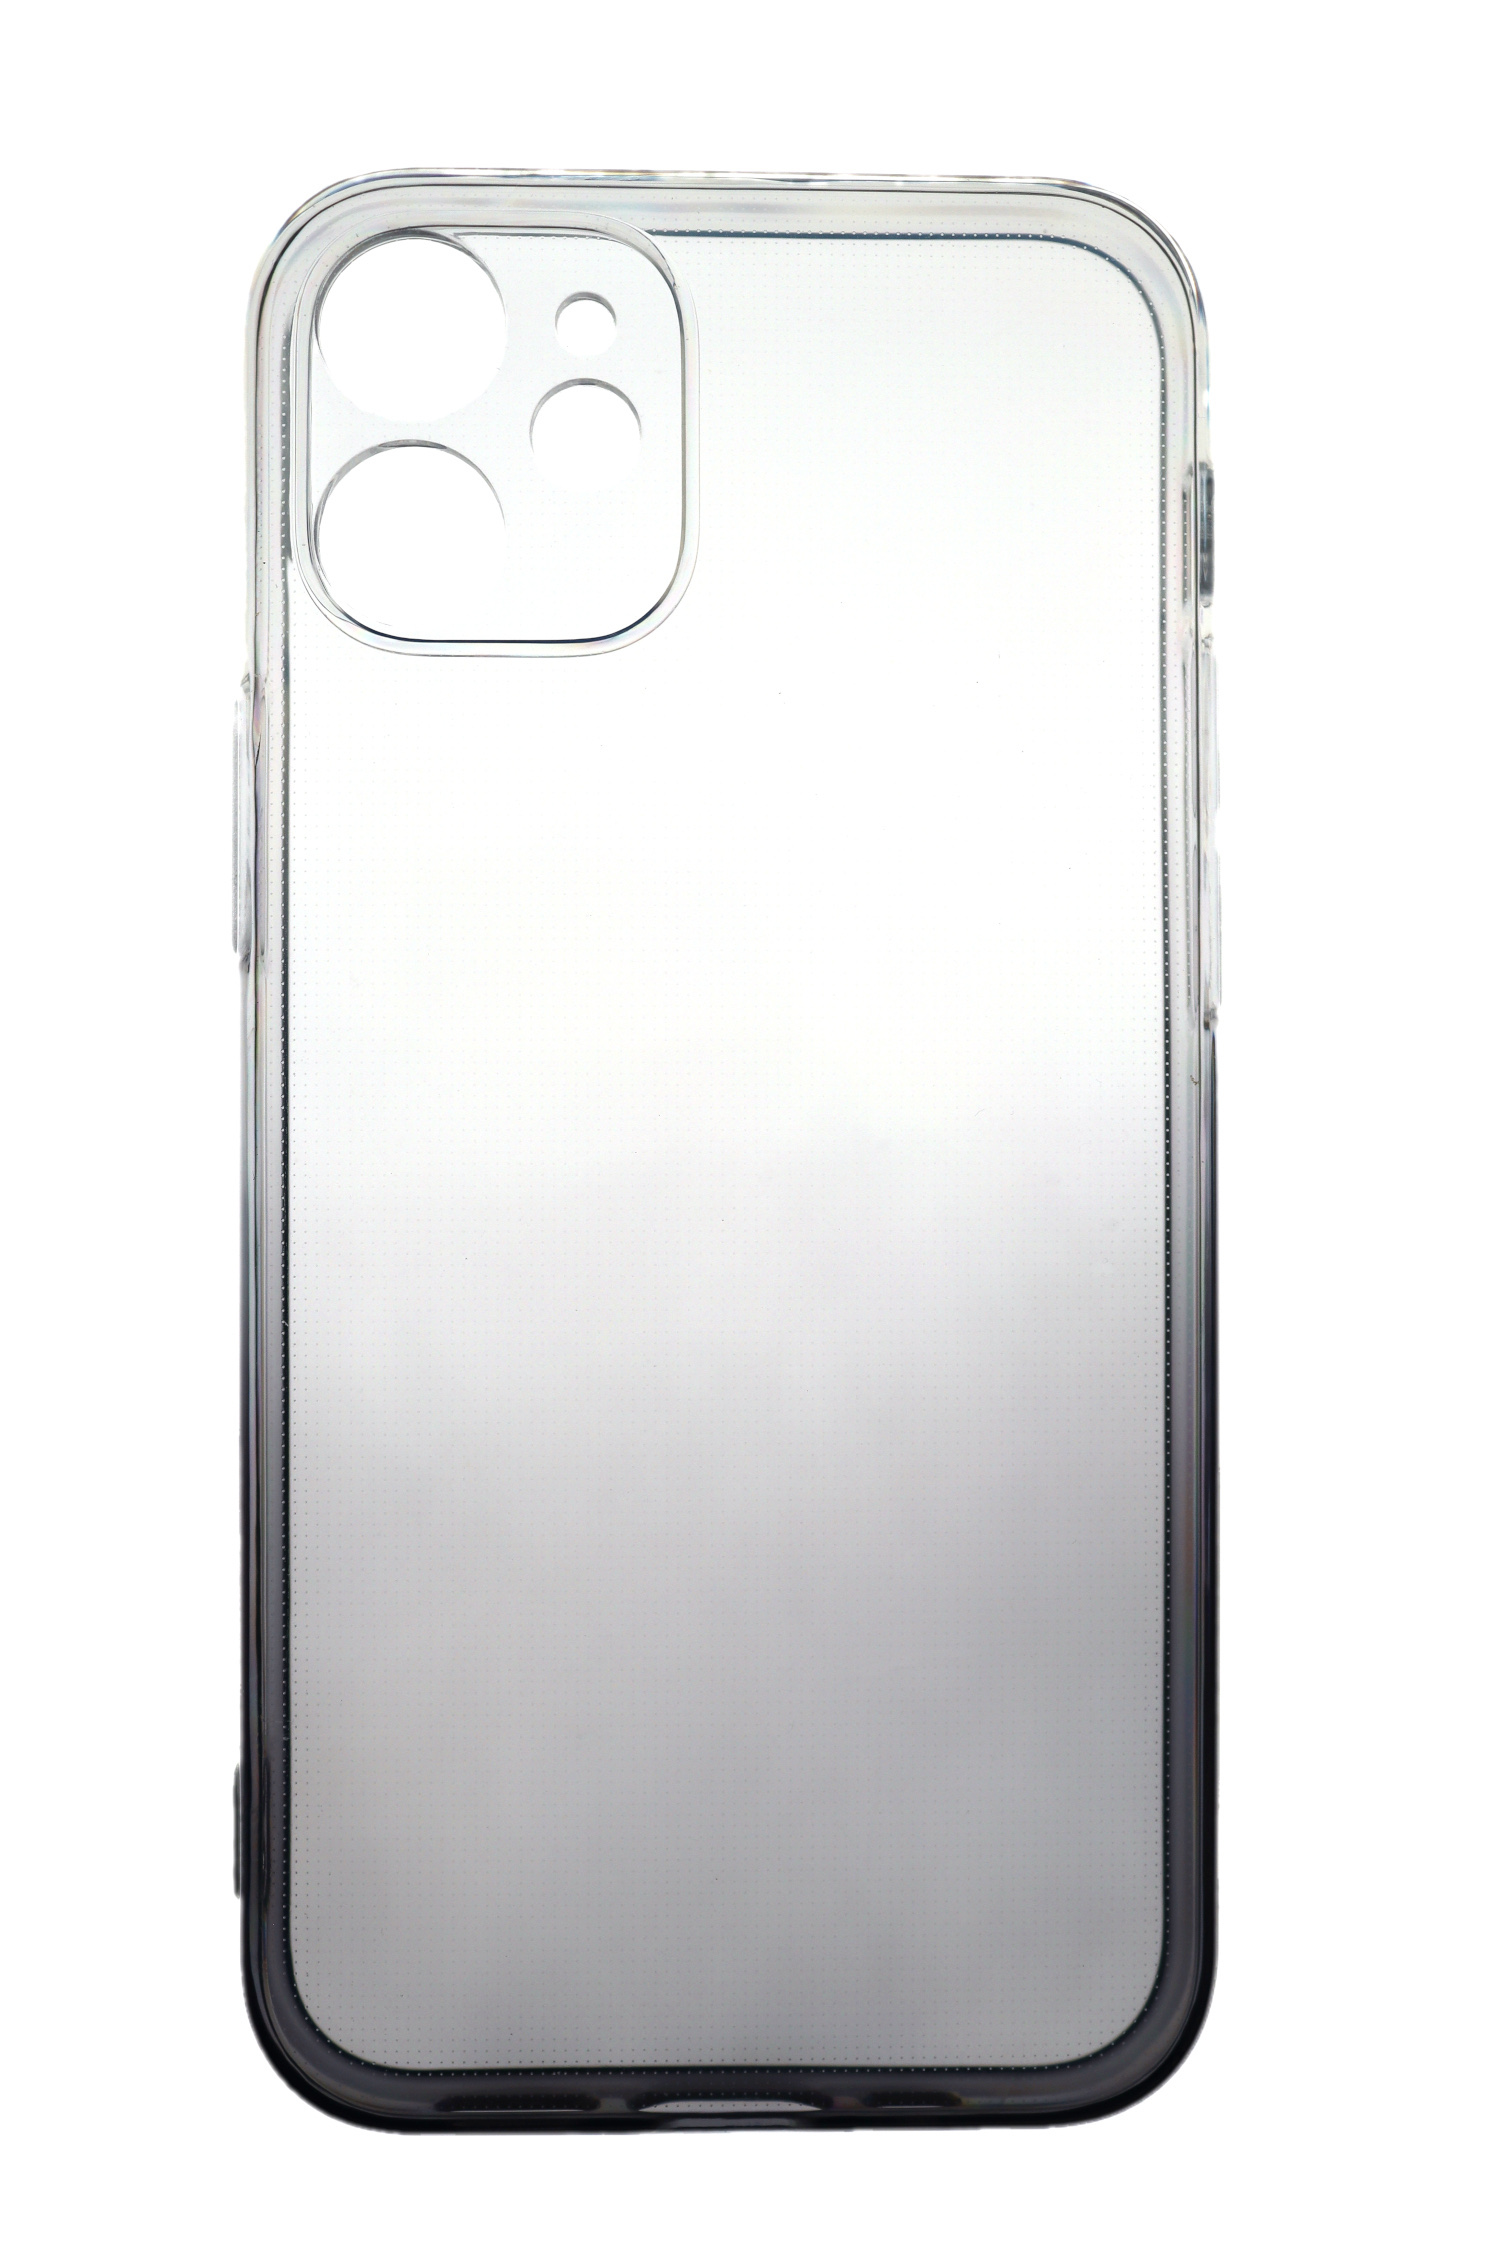 JAMCOVER 2.0 mm TPU Case Strong, Transparent iPhone Grau, Backcover, Apple, 11